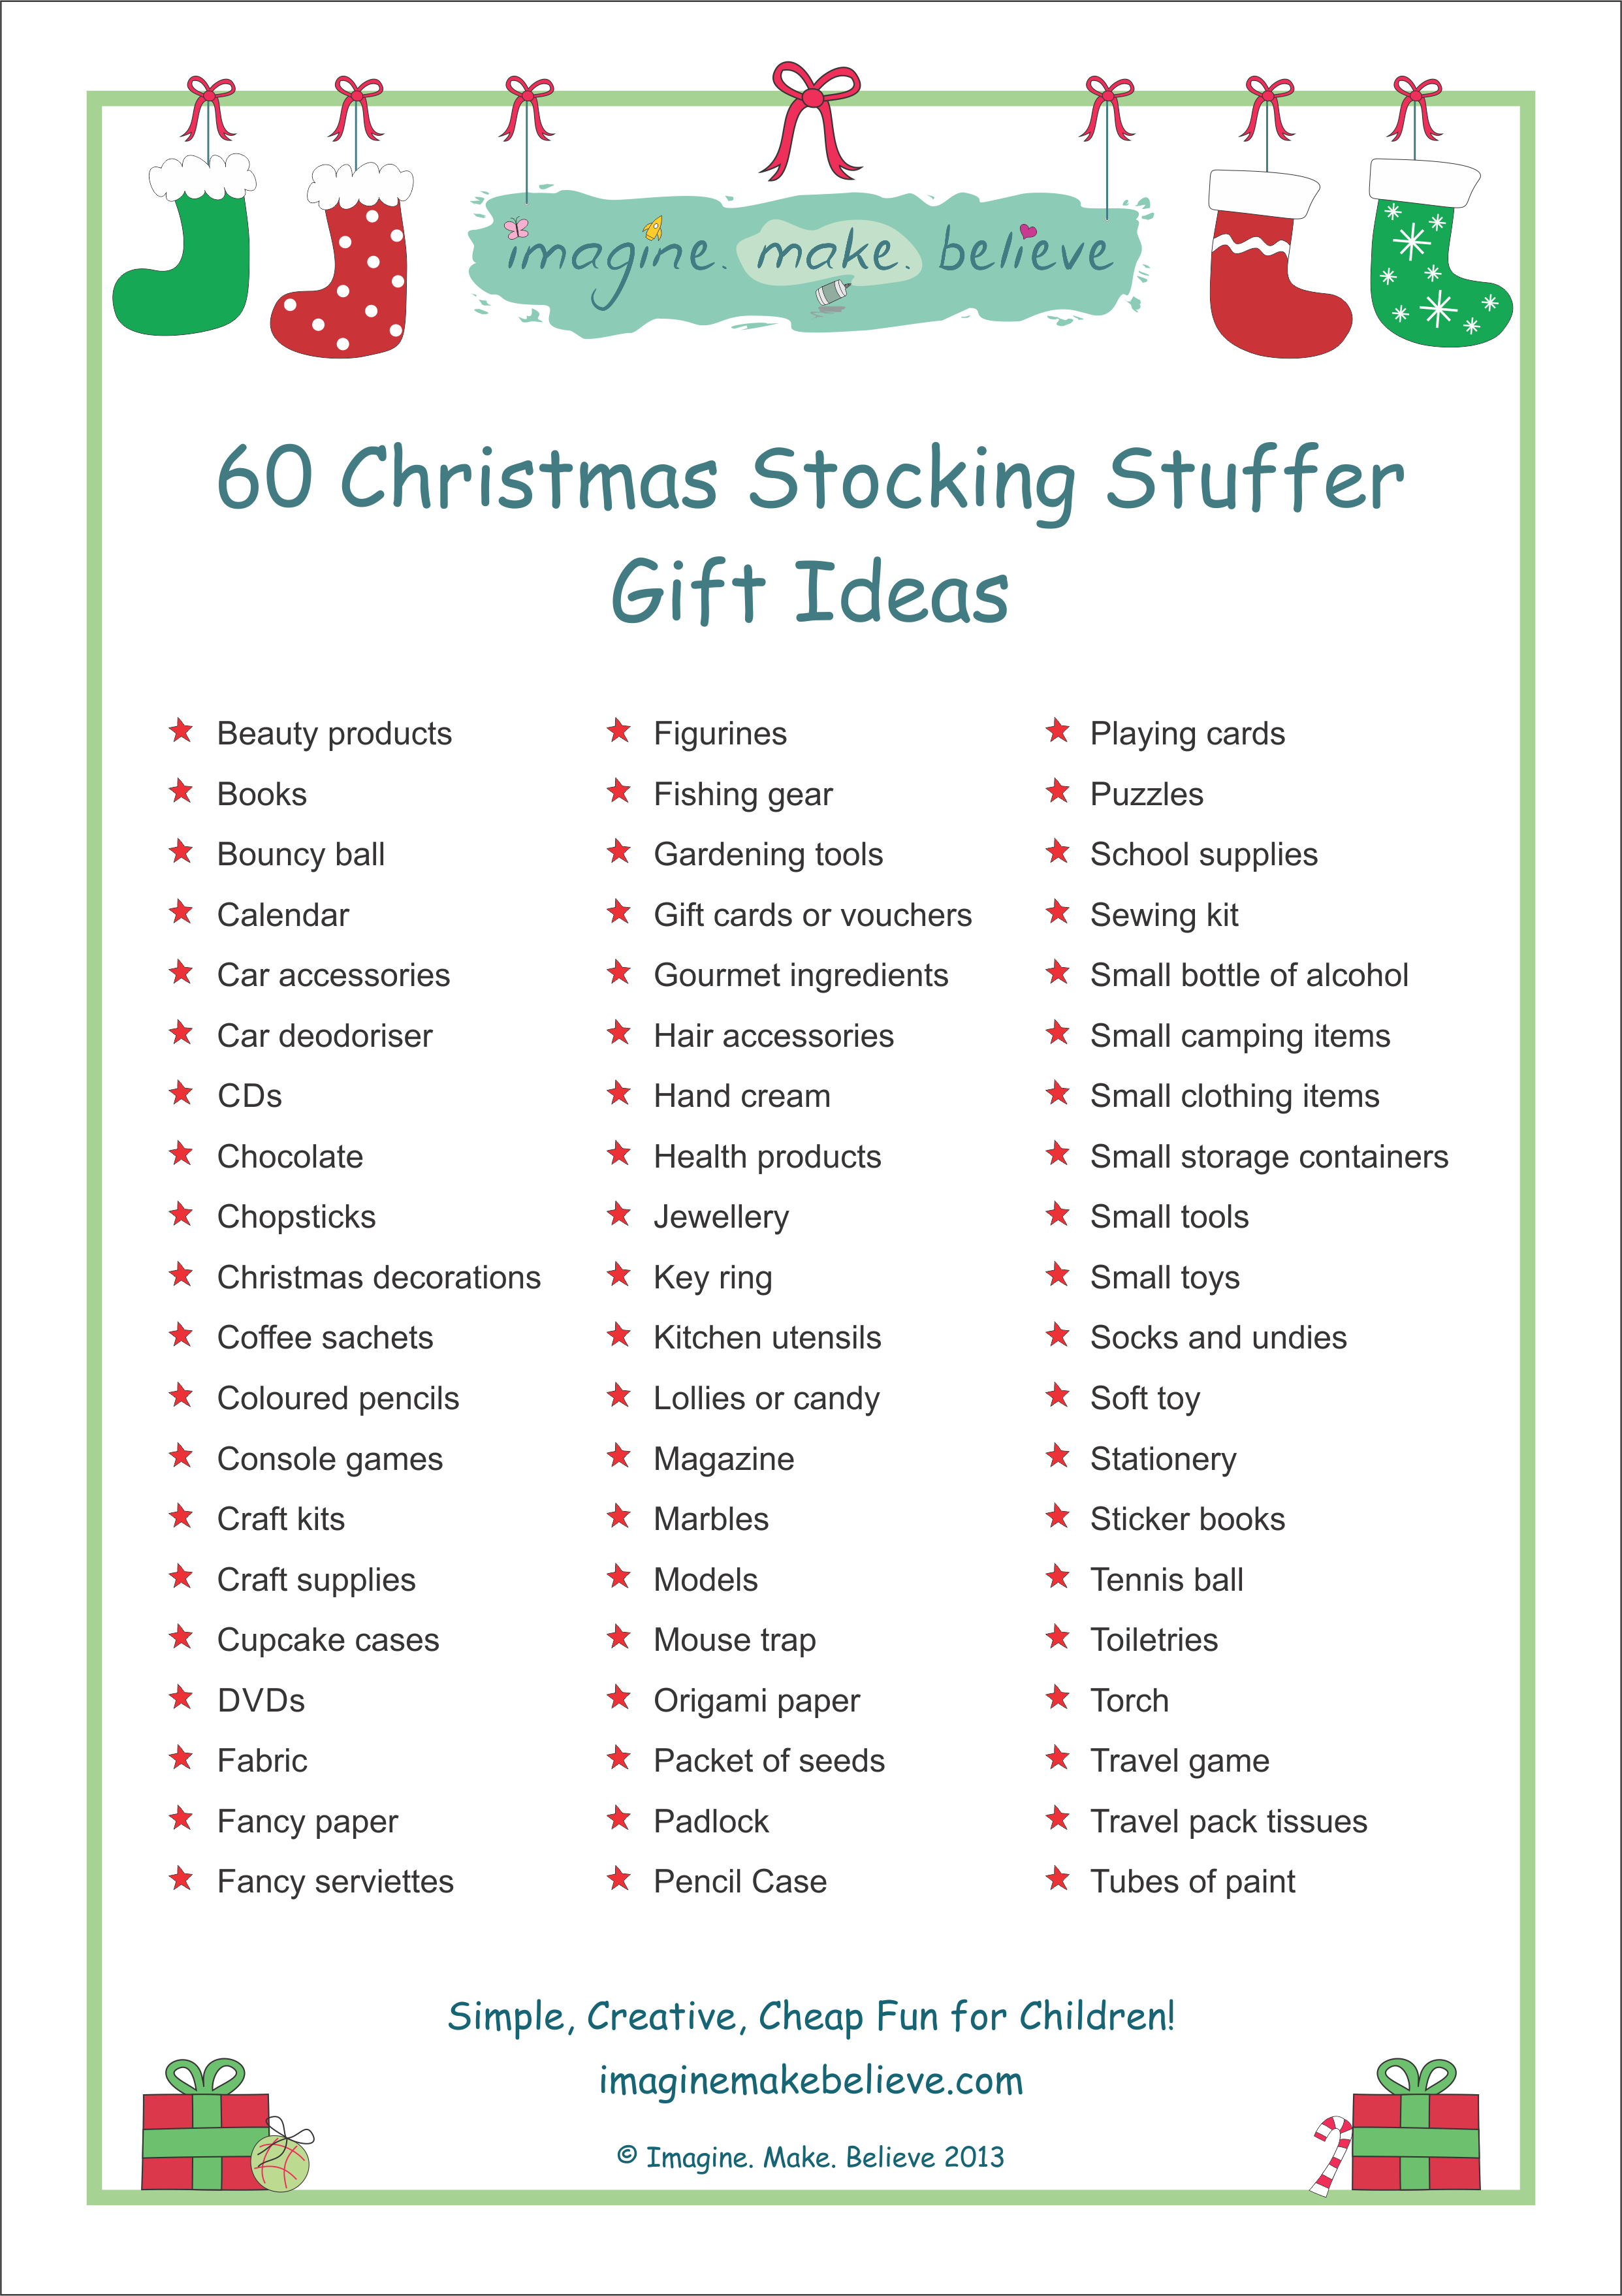 http://imaginemakebelieve.com/wp-content/uploads/2013/12/Stocking-Stuffer-Gift-Ideas.png